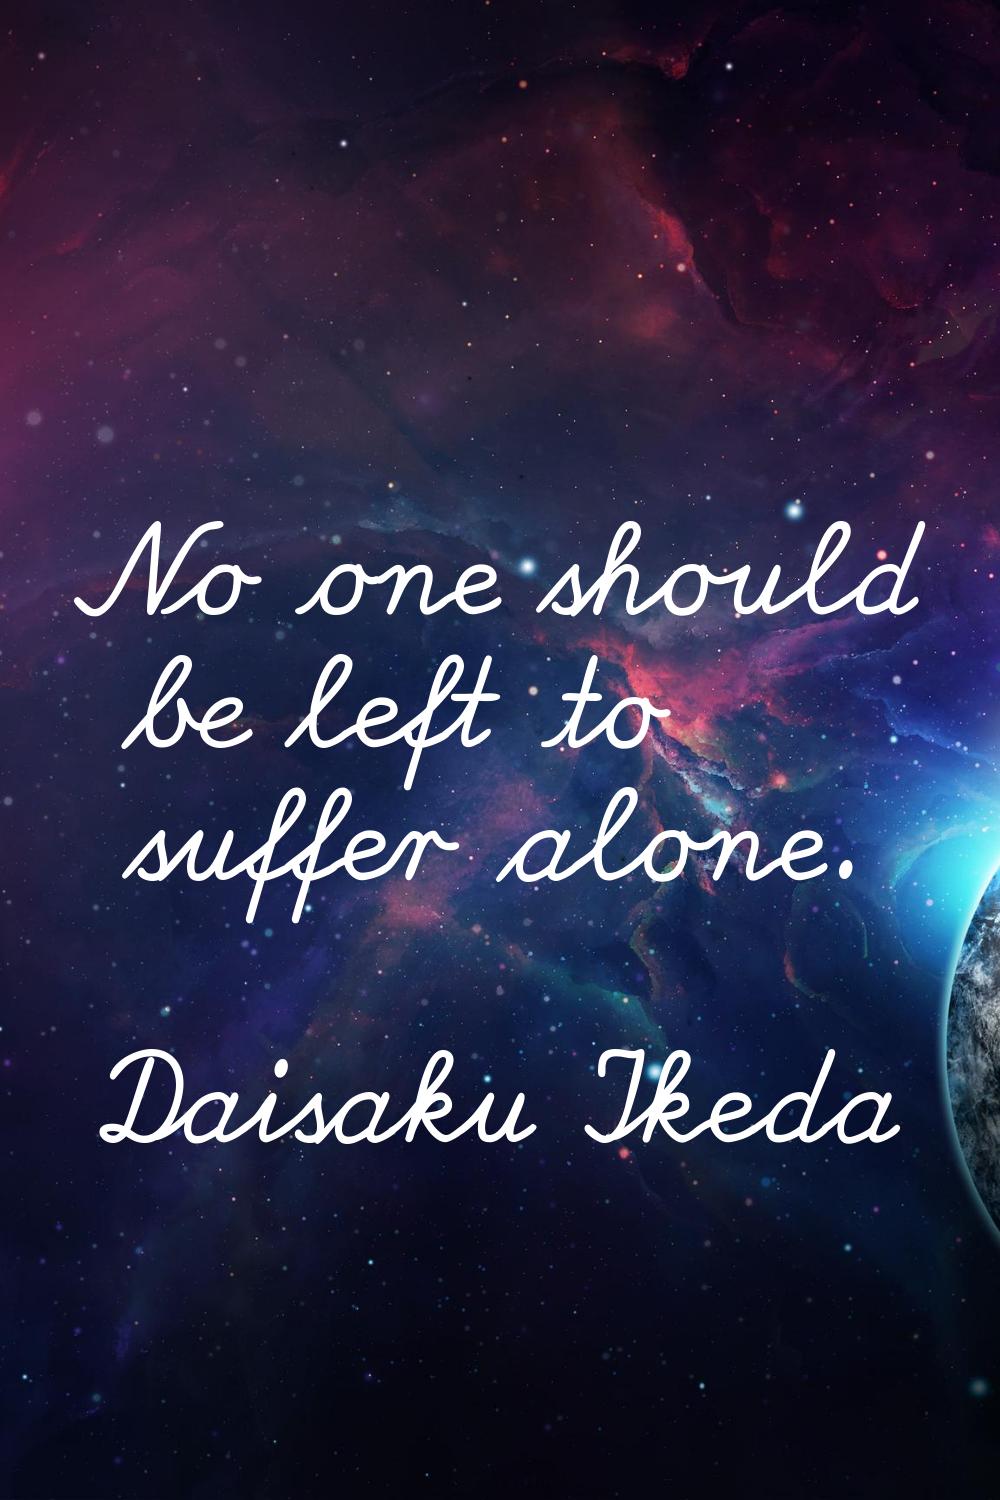 No one should be left to suffer alone.